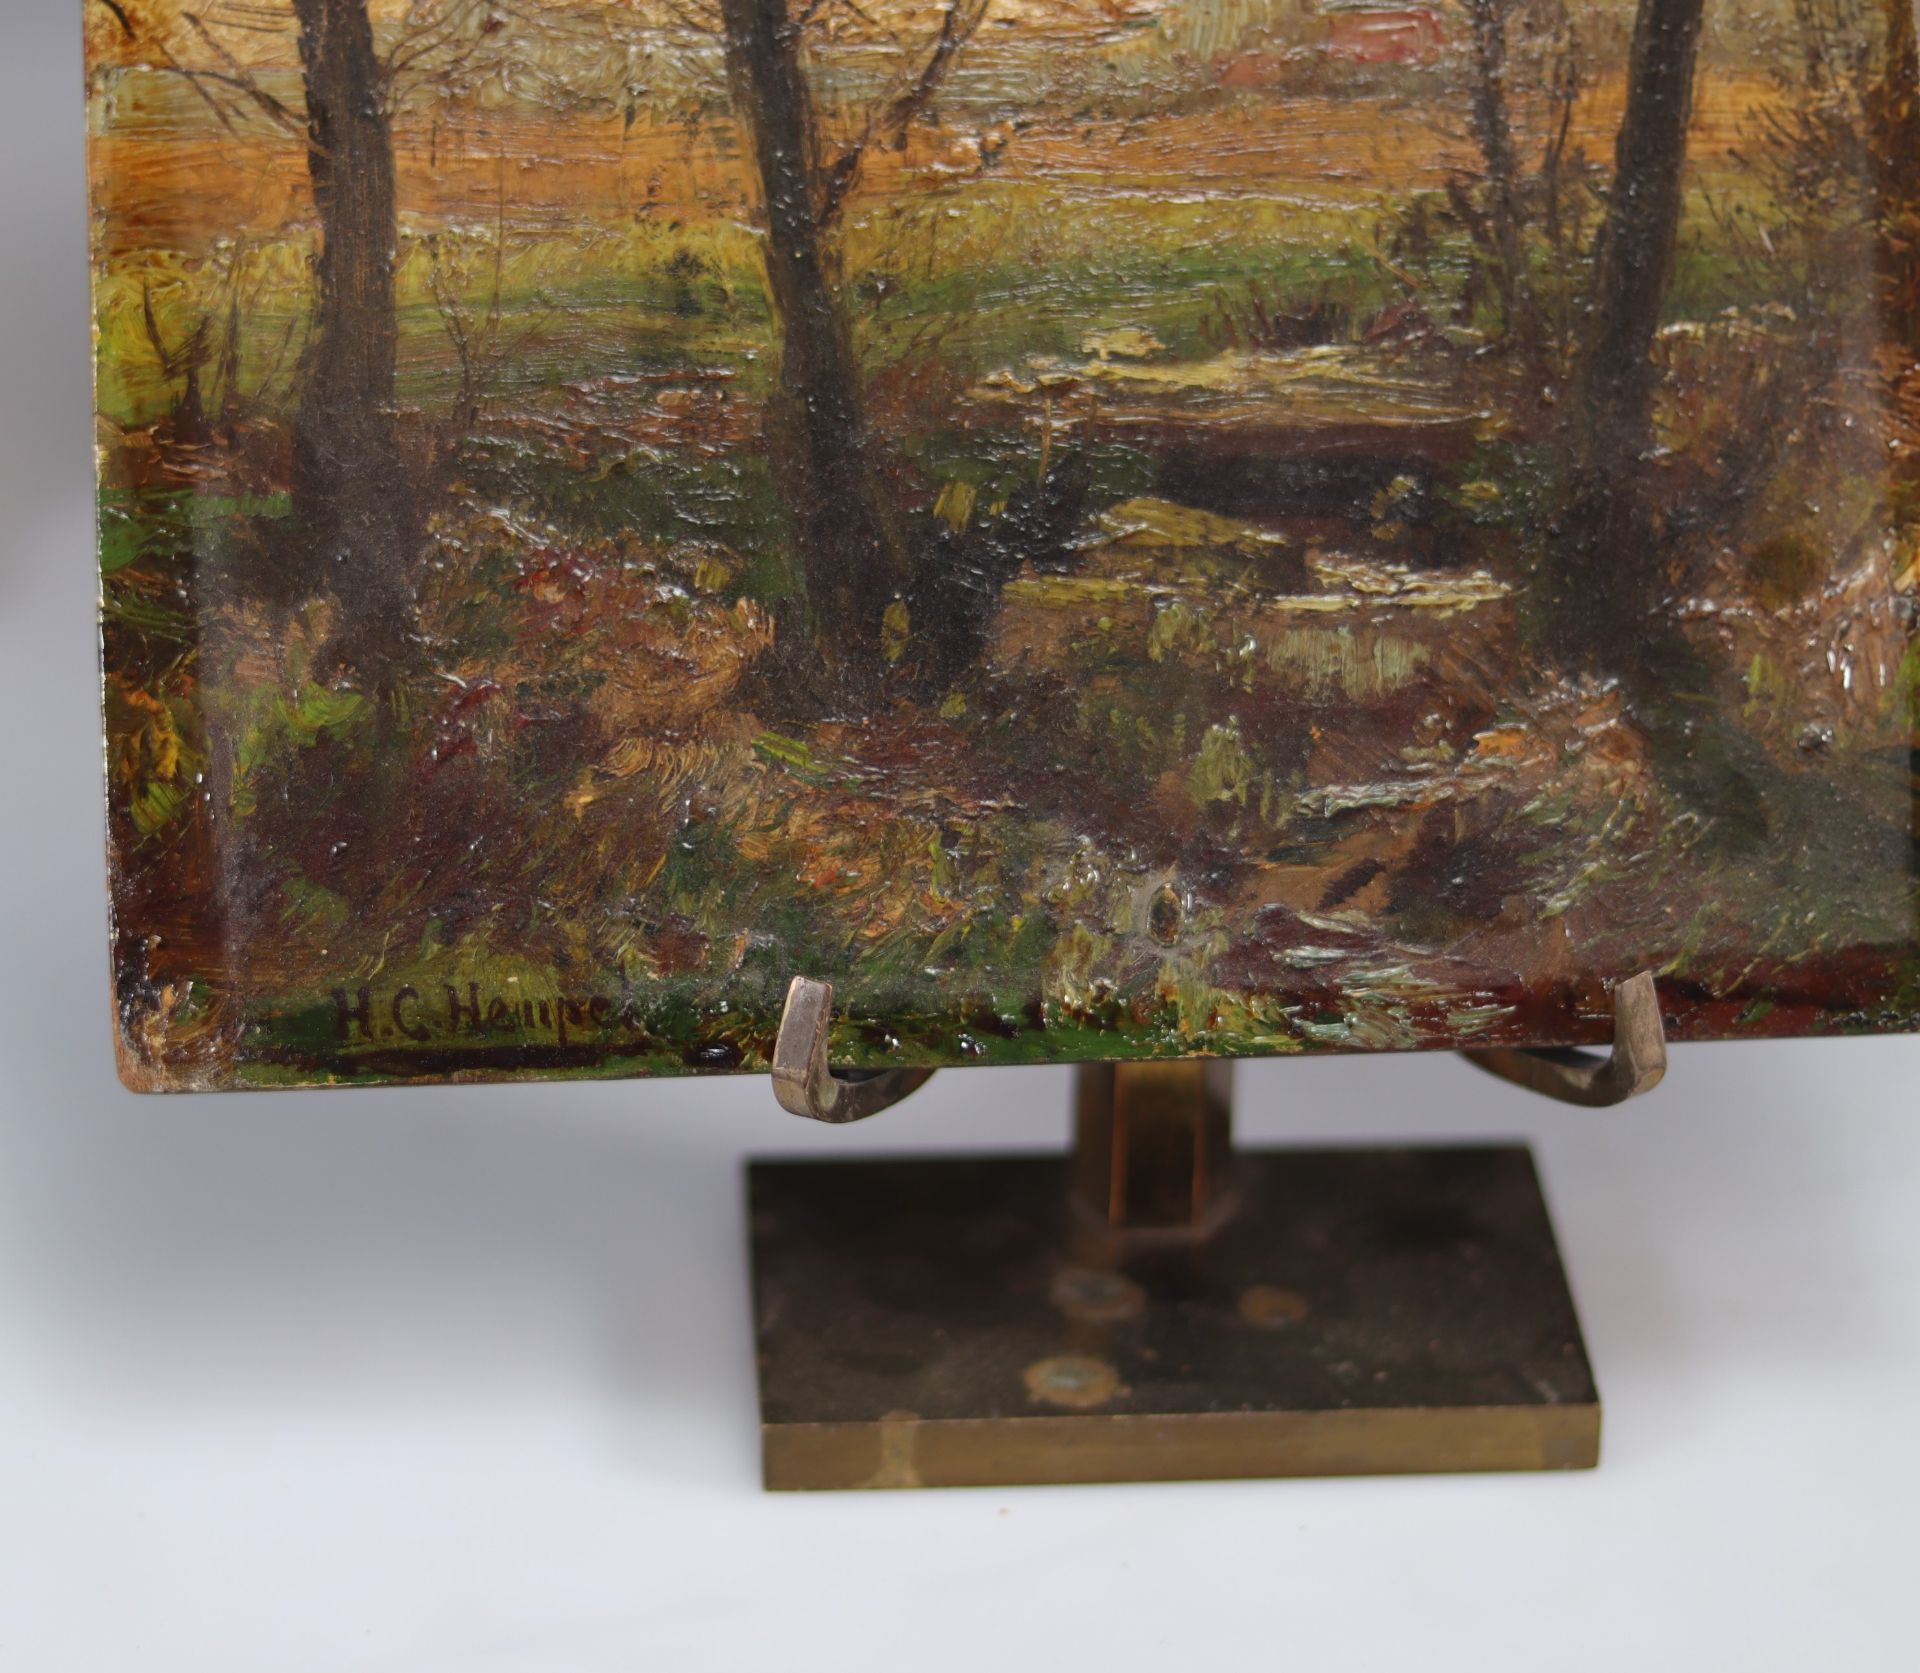 H.C. HEMPEL (1848-1921) Painting on panel "view of undergrowth" - Image 3 of 3